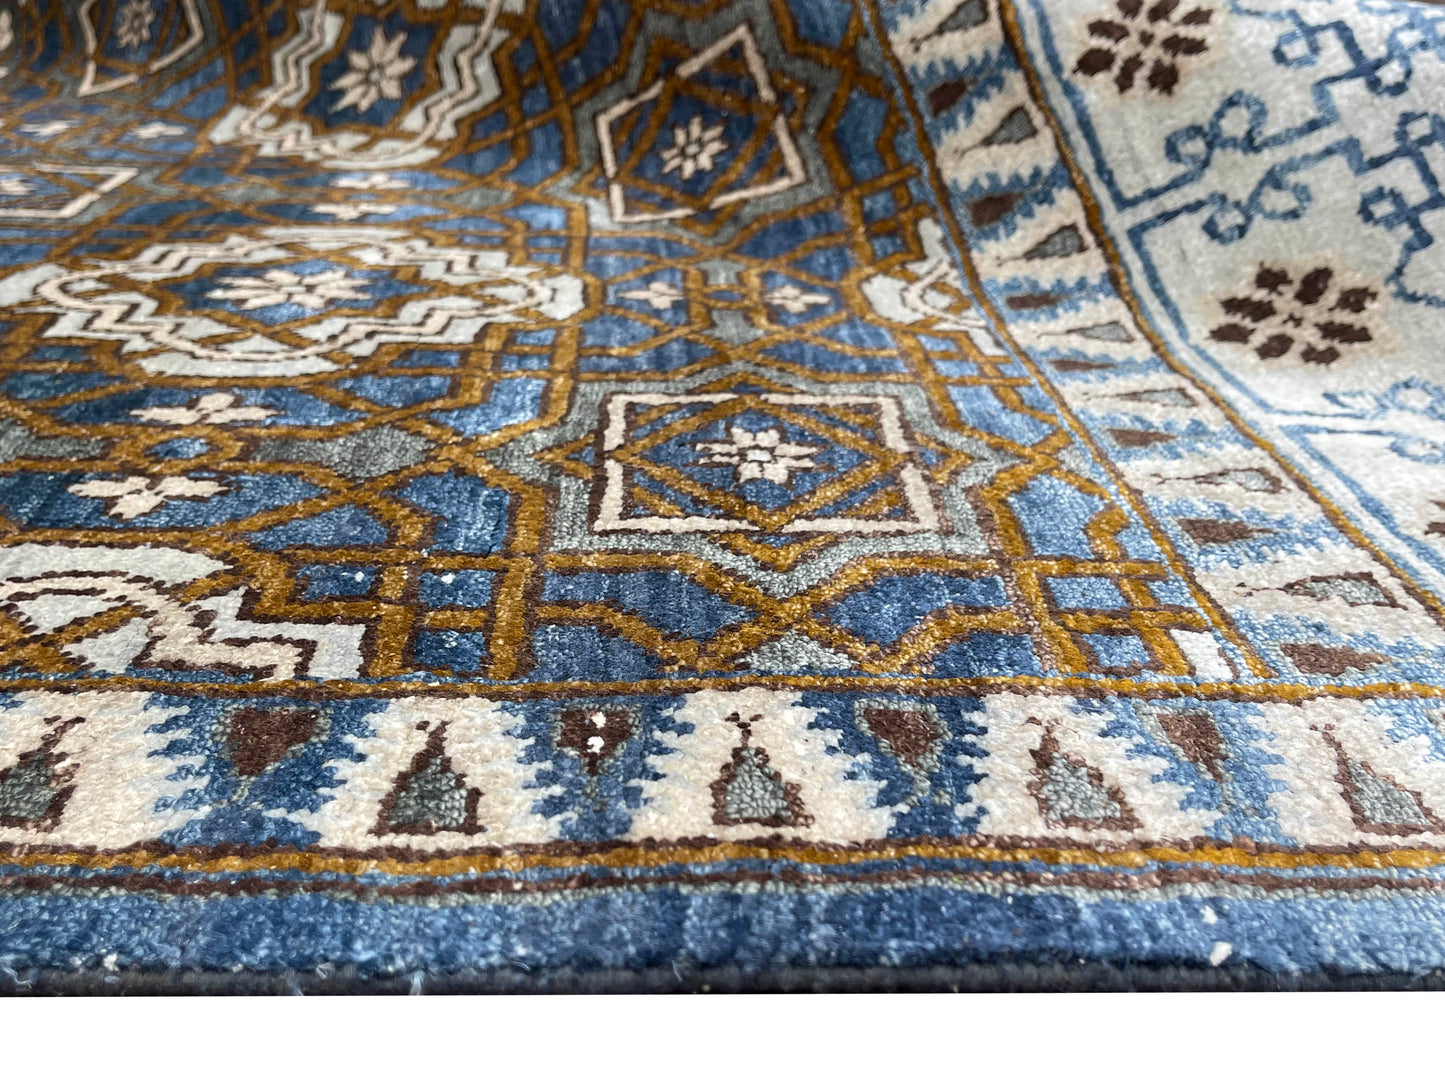 Get trendy with Navy Blue and Ivory Pure Silk Transitional Handknotted Area Rug 6x8.10ft 183X269Cms - Transitional Rugs available at Jaipur Oriental Rugs. Grab yours for $3815.00 today!